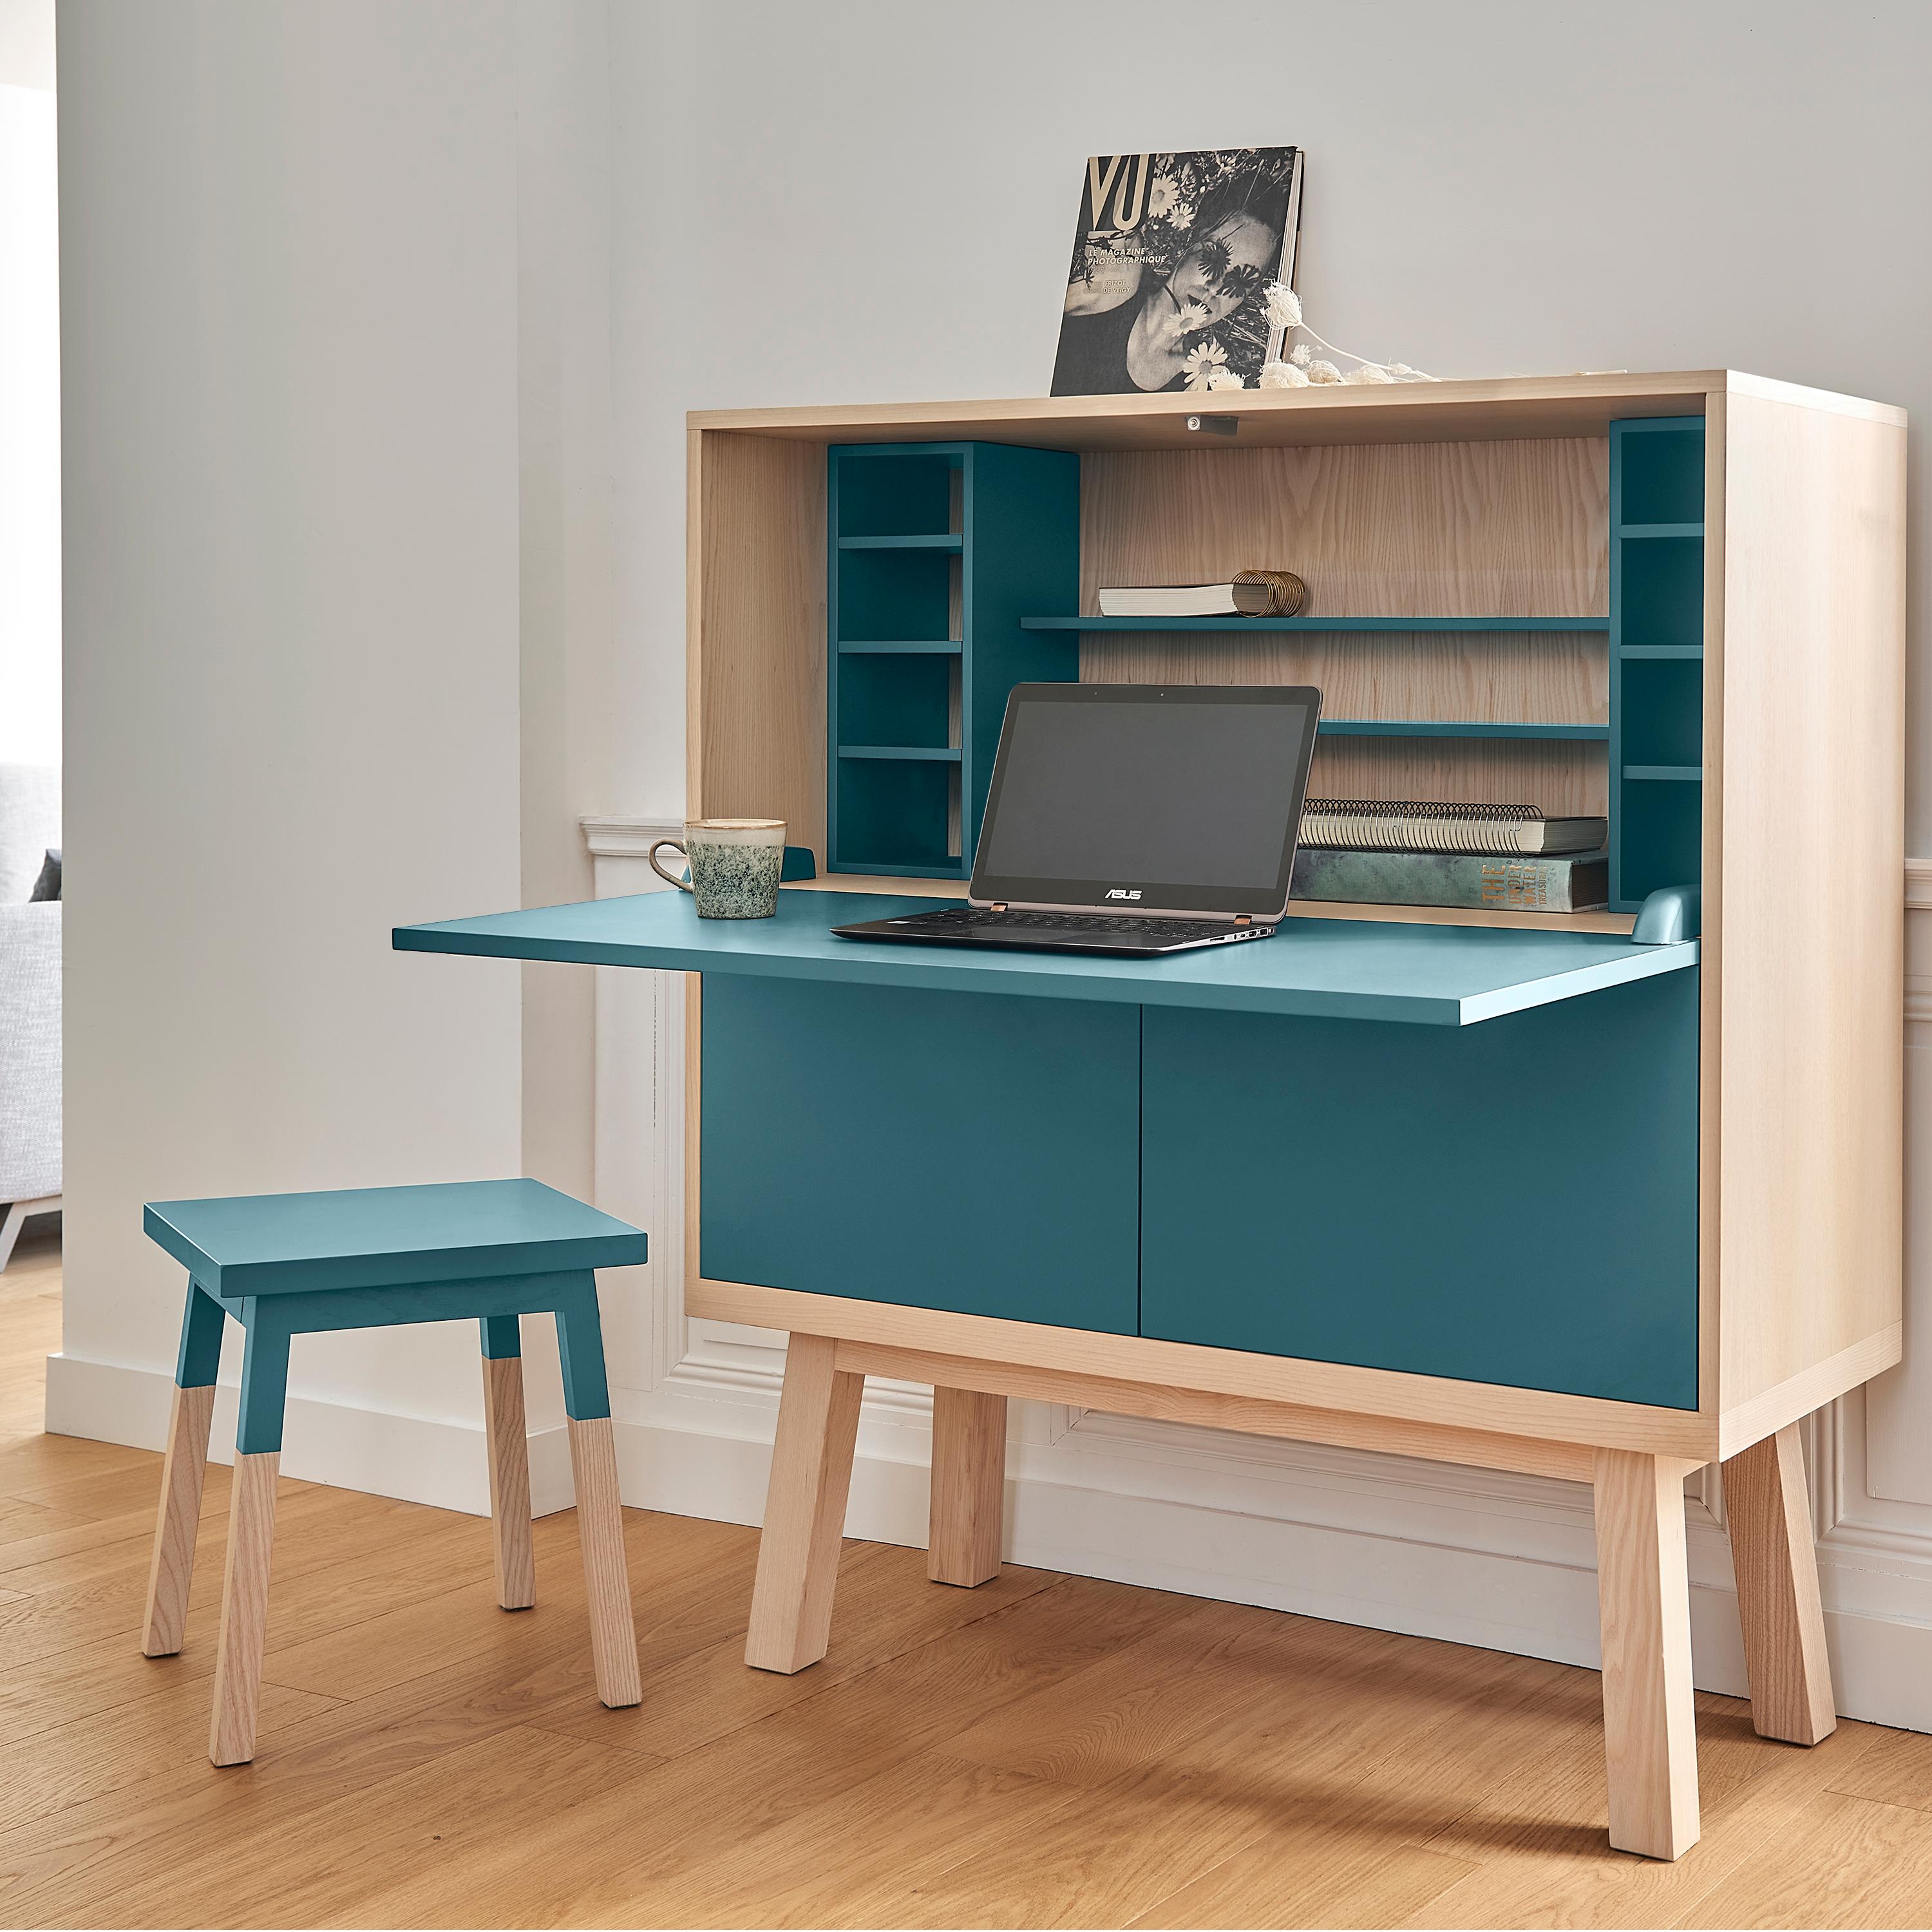 This large secretary desk is designed by the famous parisian Designer Eric Gizard and delivered fully mounted. 

The overall dimensions of the box itself are
Width 120 cm / 47.2''
Height 90 cm / 35.4'' 
Depth 46 cm / 18.11''

Height of the